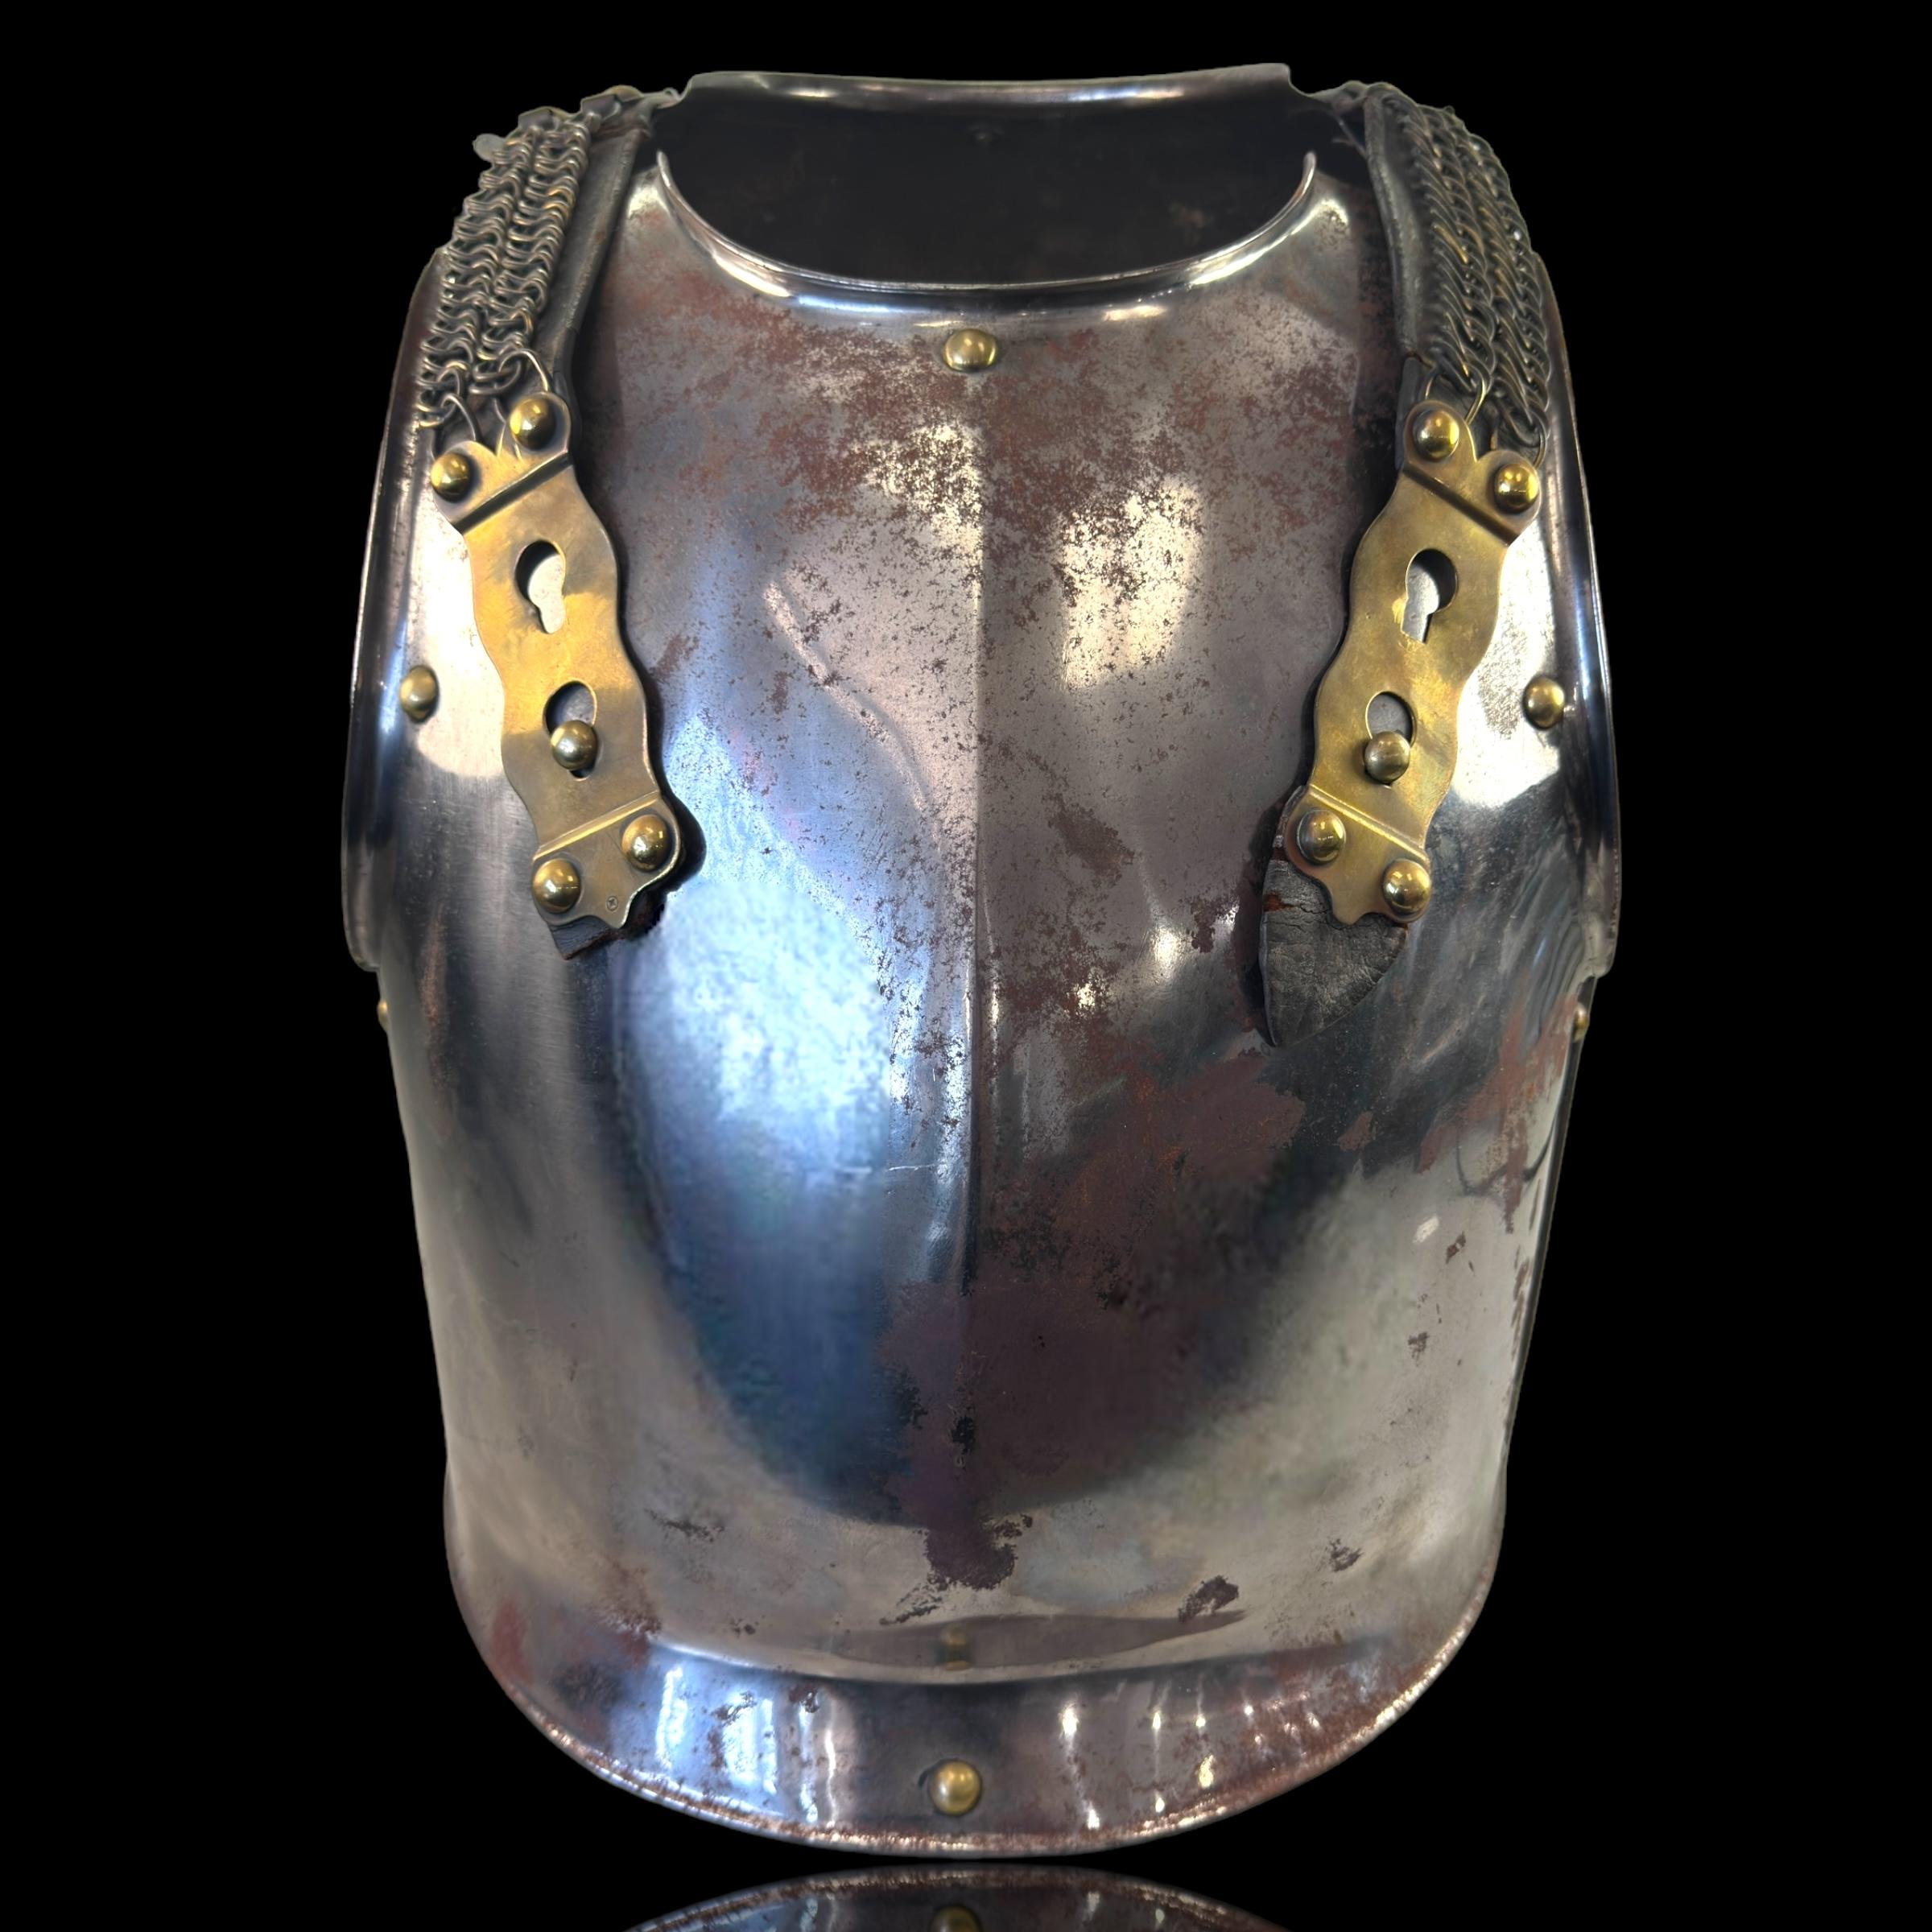 1833 French 2nd Empire Heavy Cavalry cuirass armor set